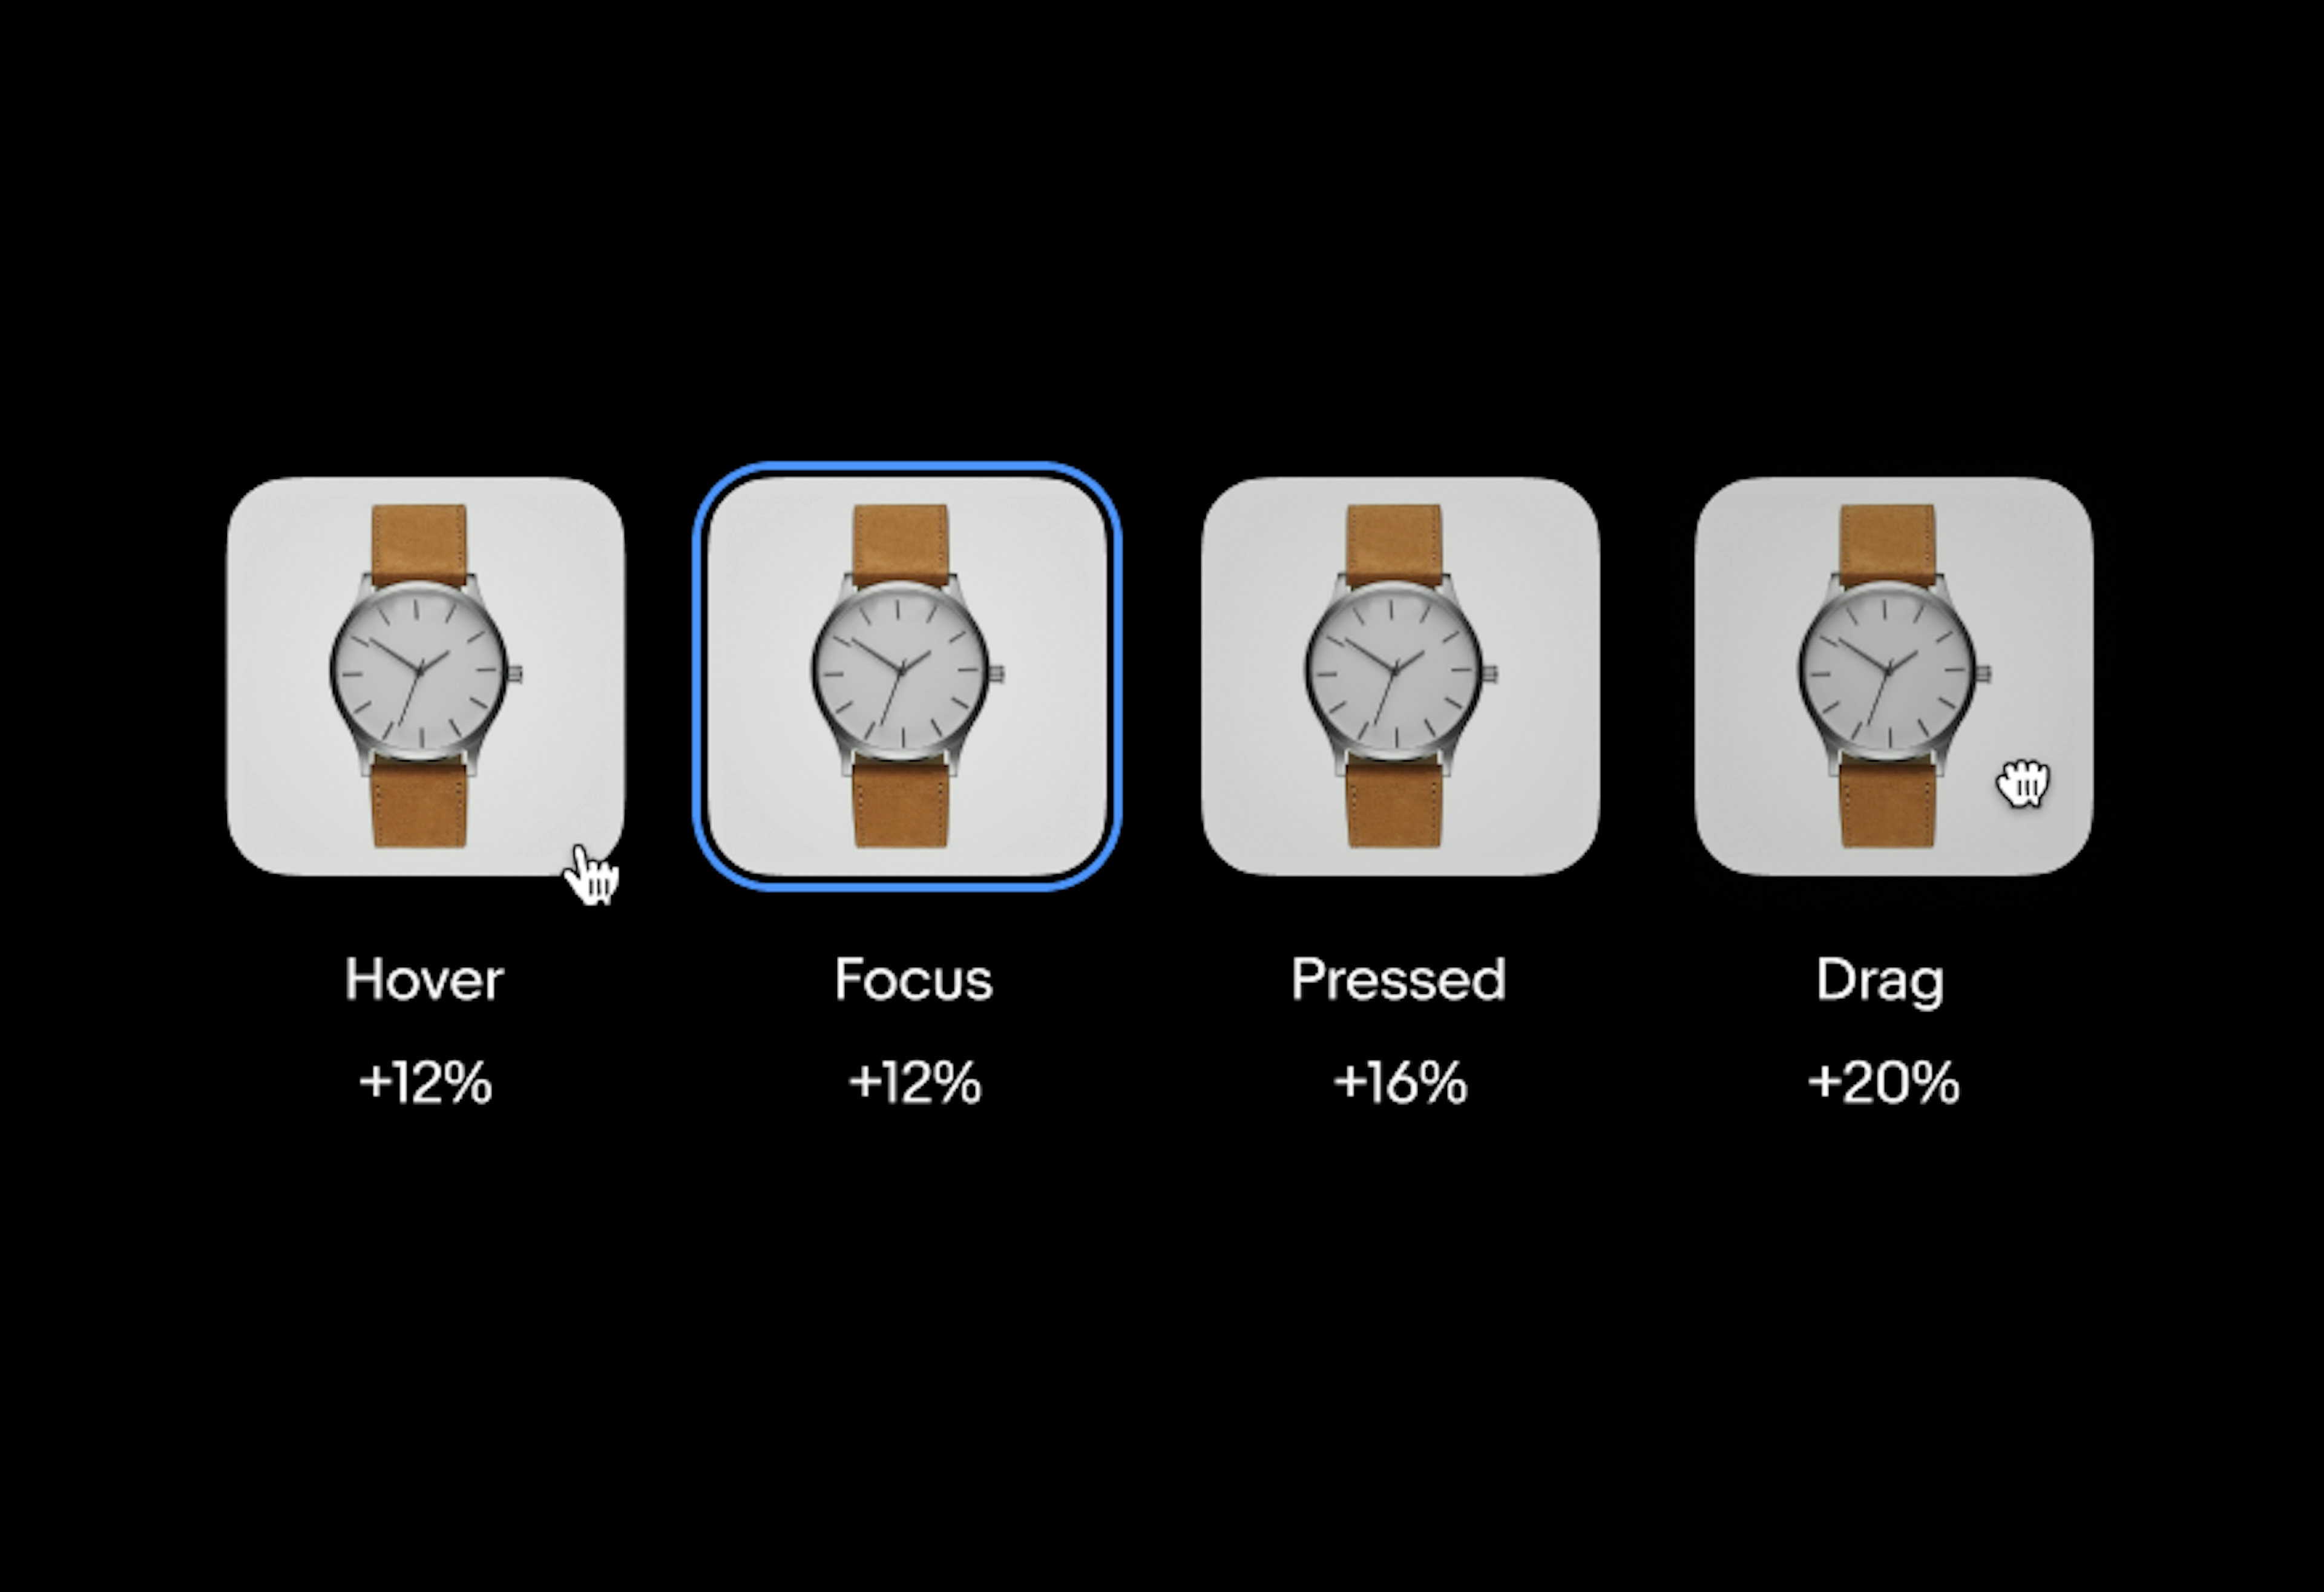 Four image buttons stacked in a row in dark mode. The image is of a watch. The first button is hovered by a hand pointer cursor with a state layer of black 12%. The second button is focused with a blue outline and a state layer of black 12%. The third button is pressed with a state layer of back 16%. The fourth button is being dragged with a closed hand icon and a state layer of black 20%.